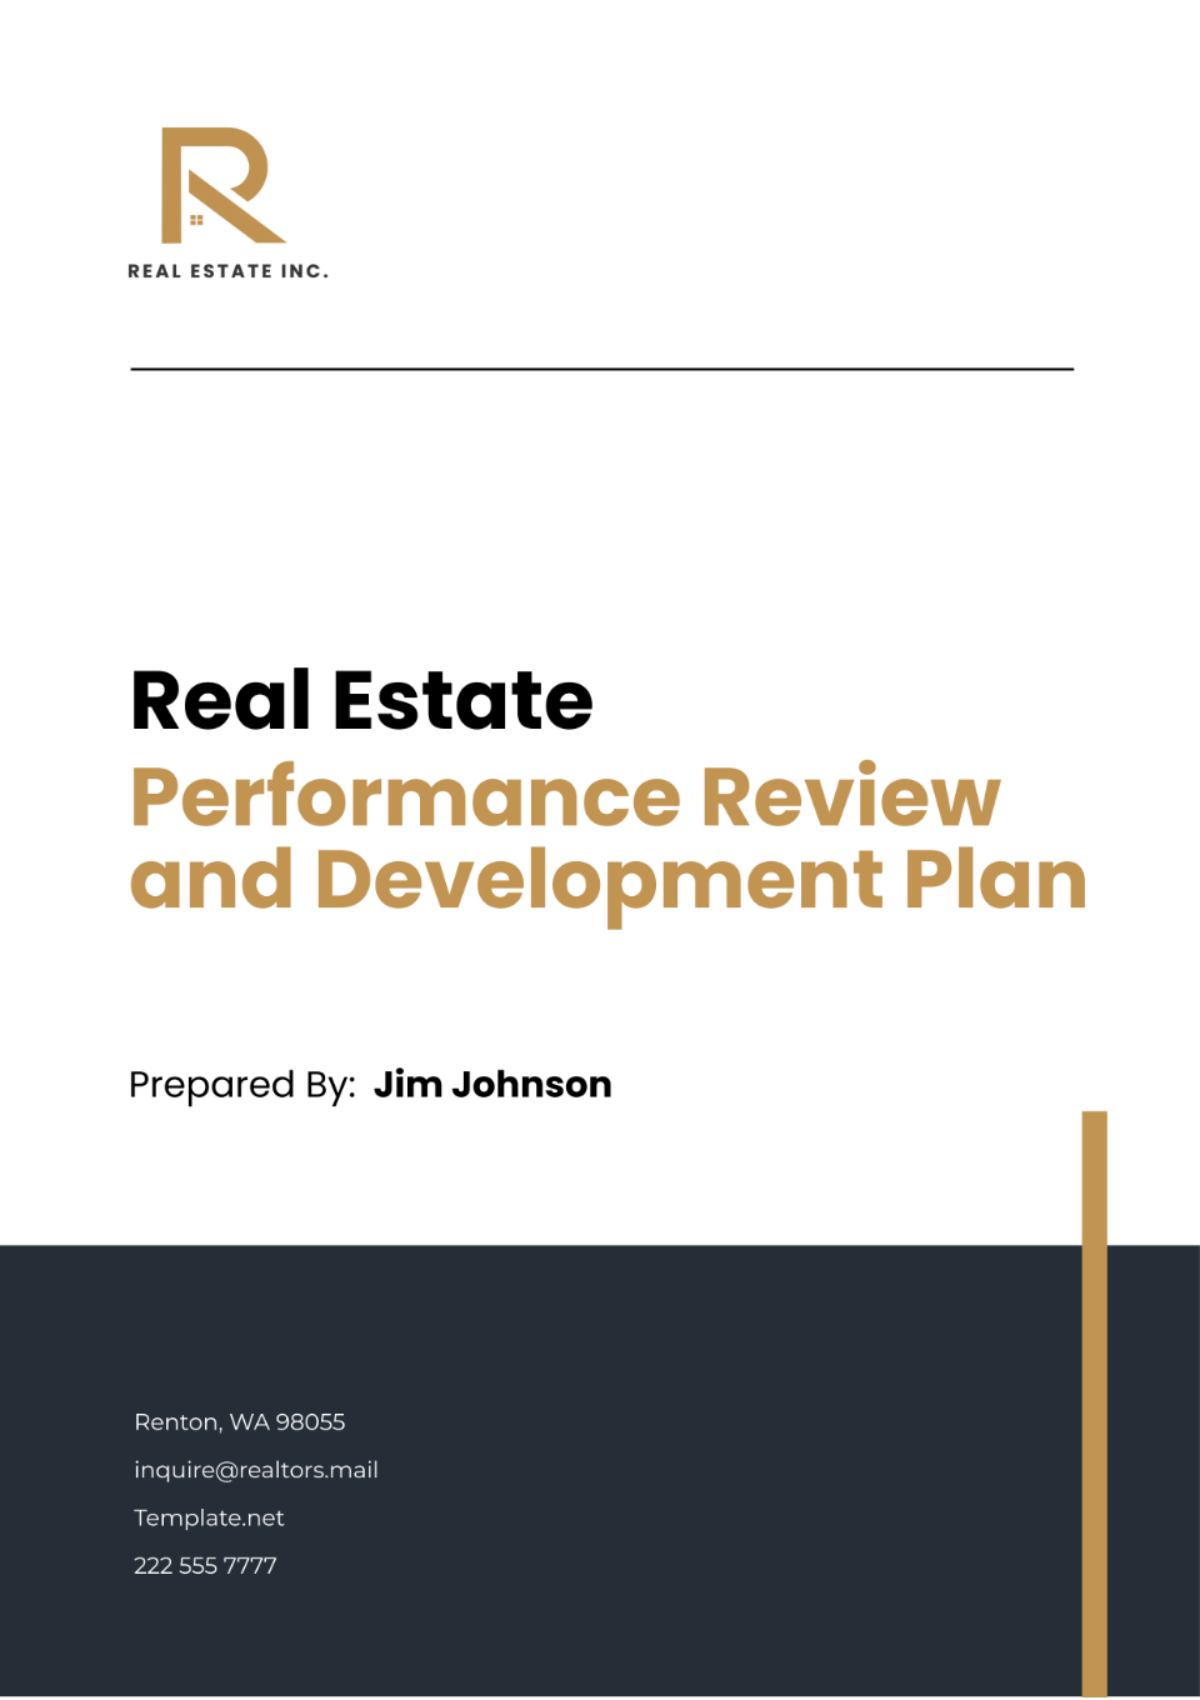 Real Estate Performance Review and Development Plan Template